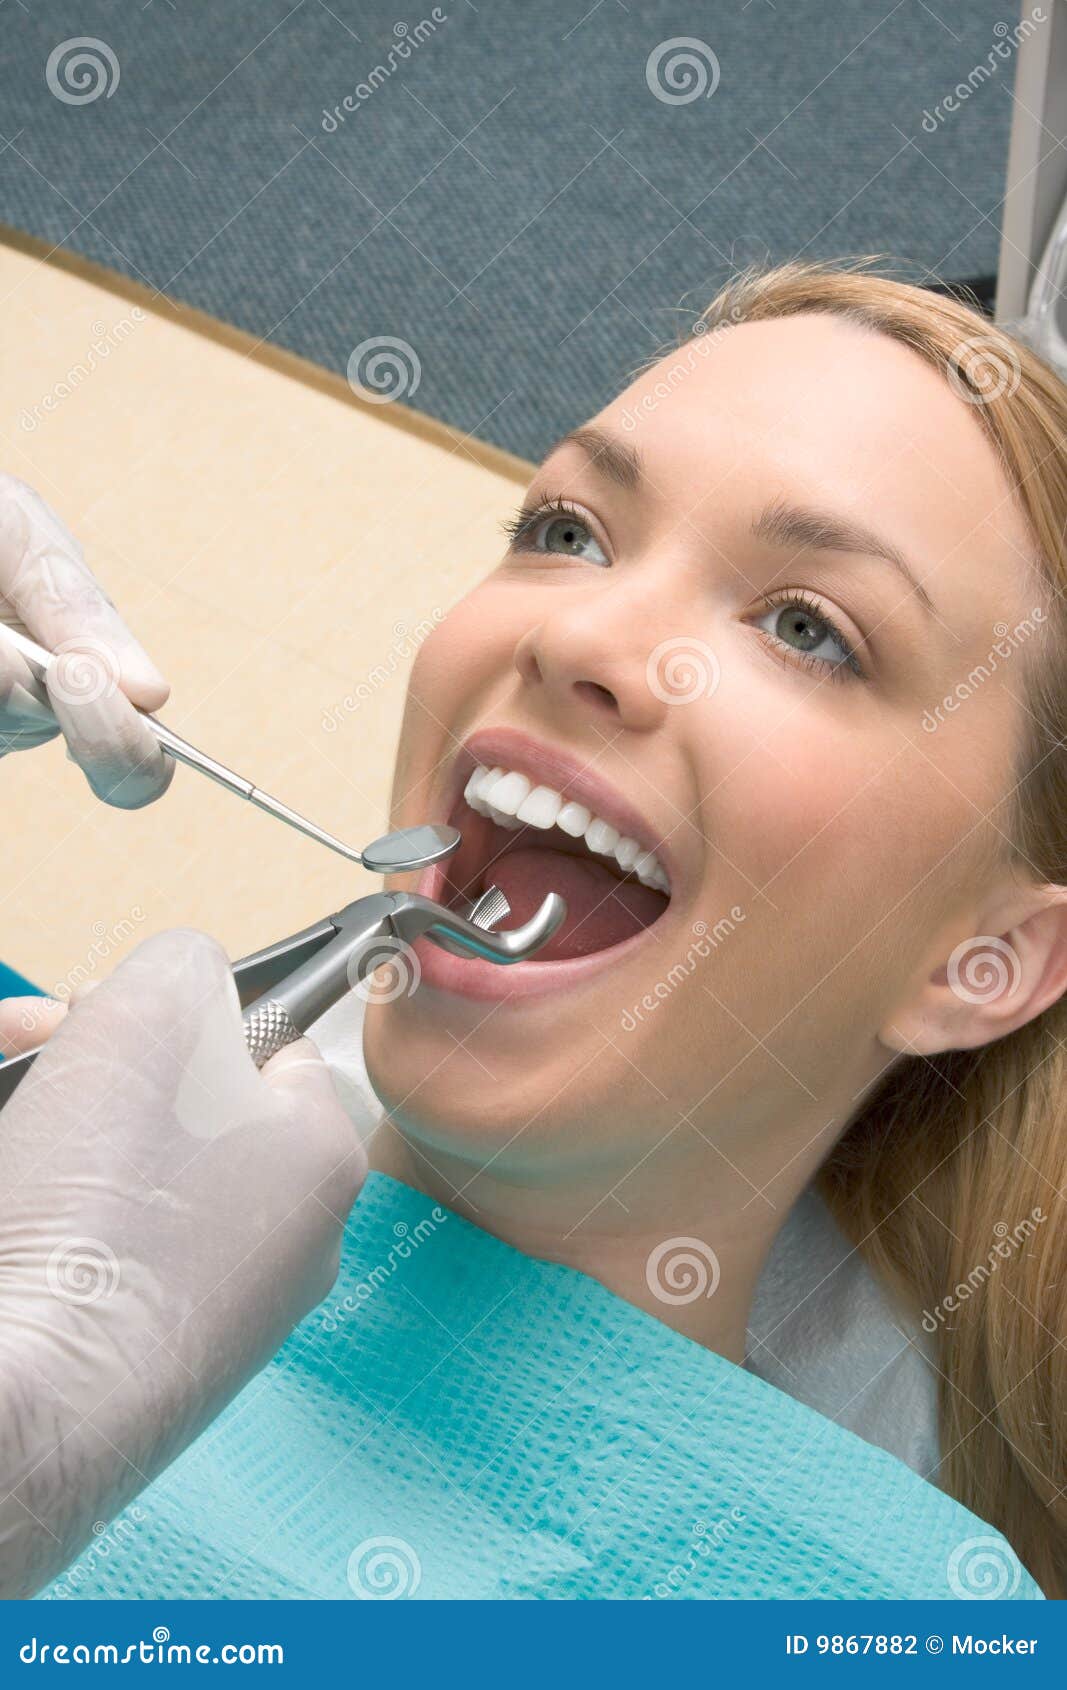 tooth extraction by dentist using forceps